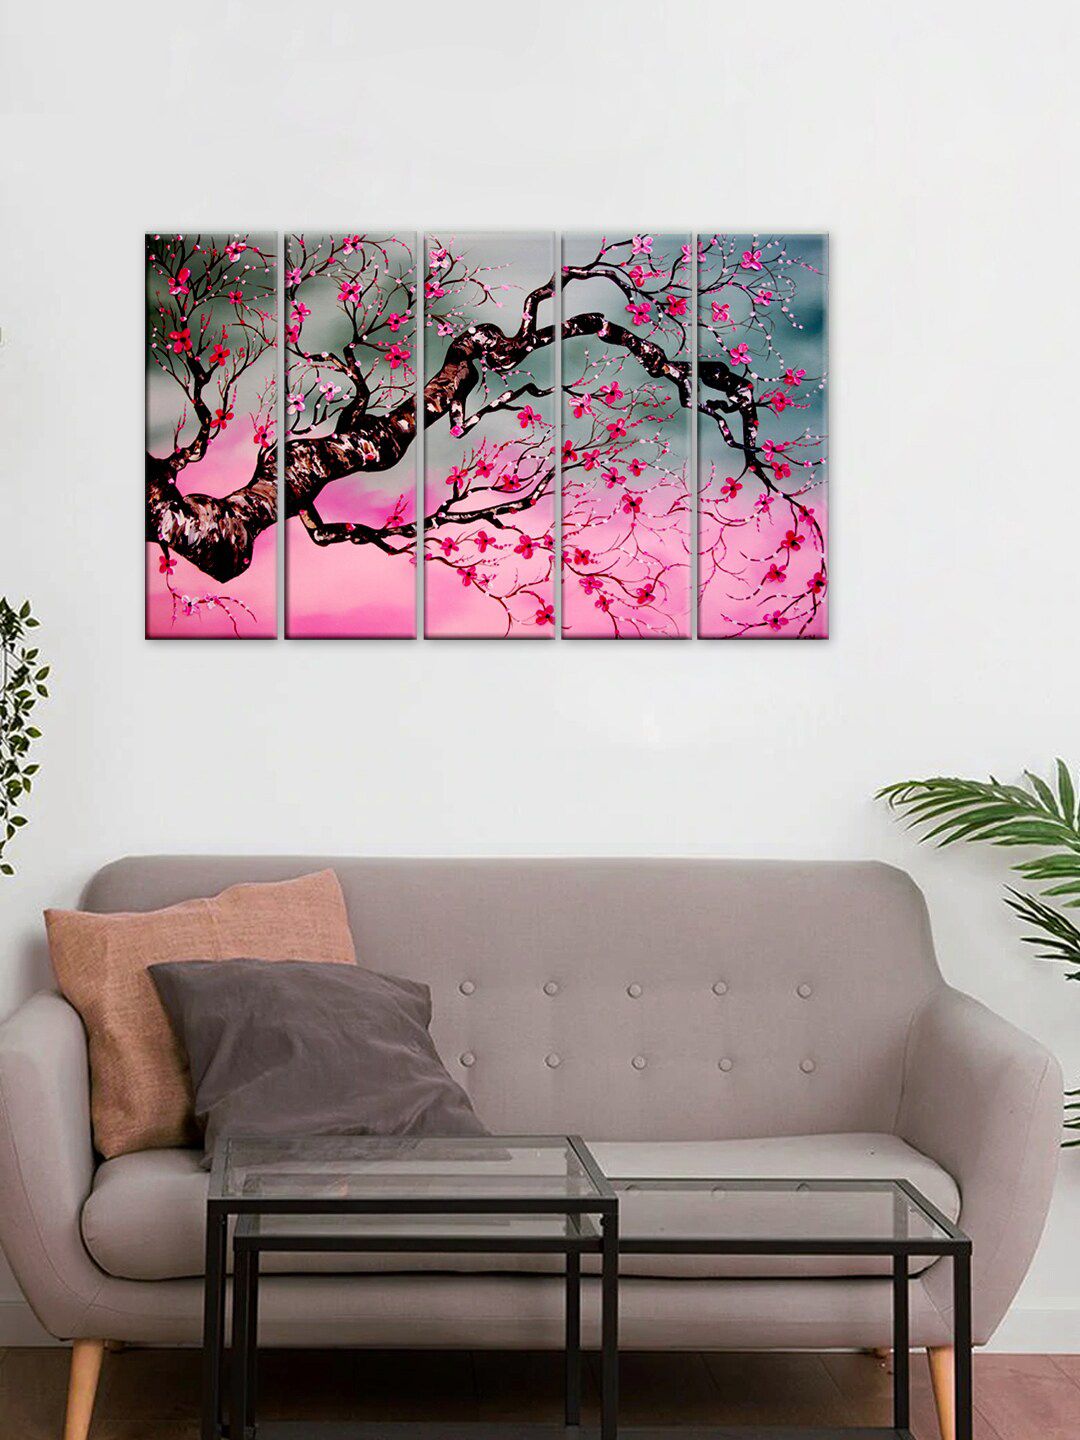 WALLMANTRA Set Of 5 Cherry Blossom Tree Wall Painting Wall Art Price in India